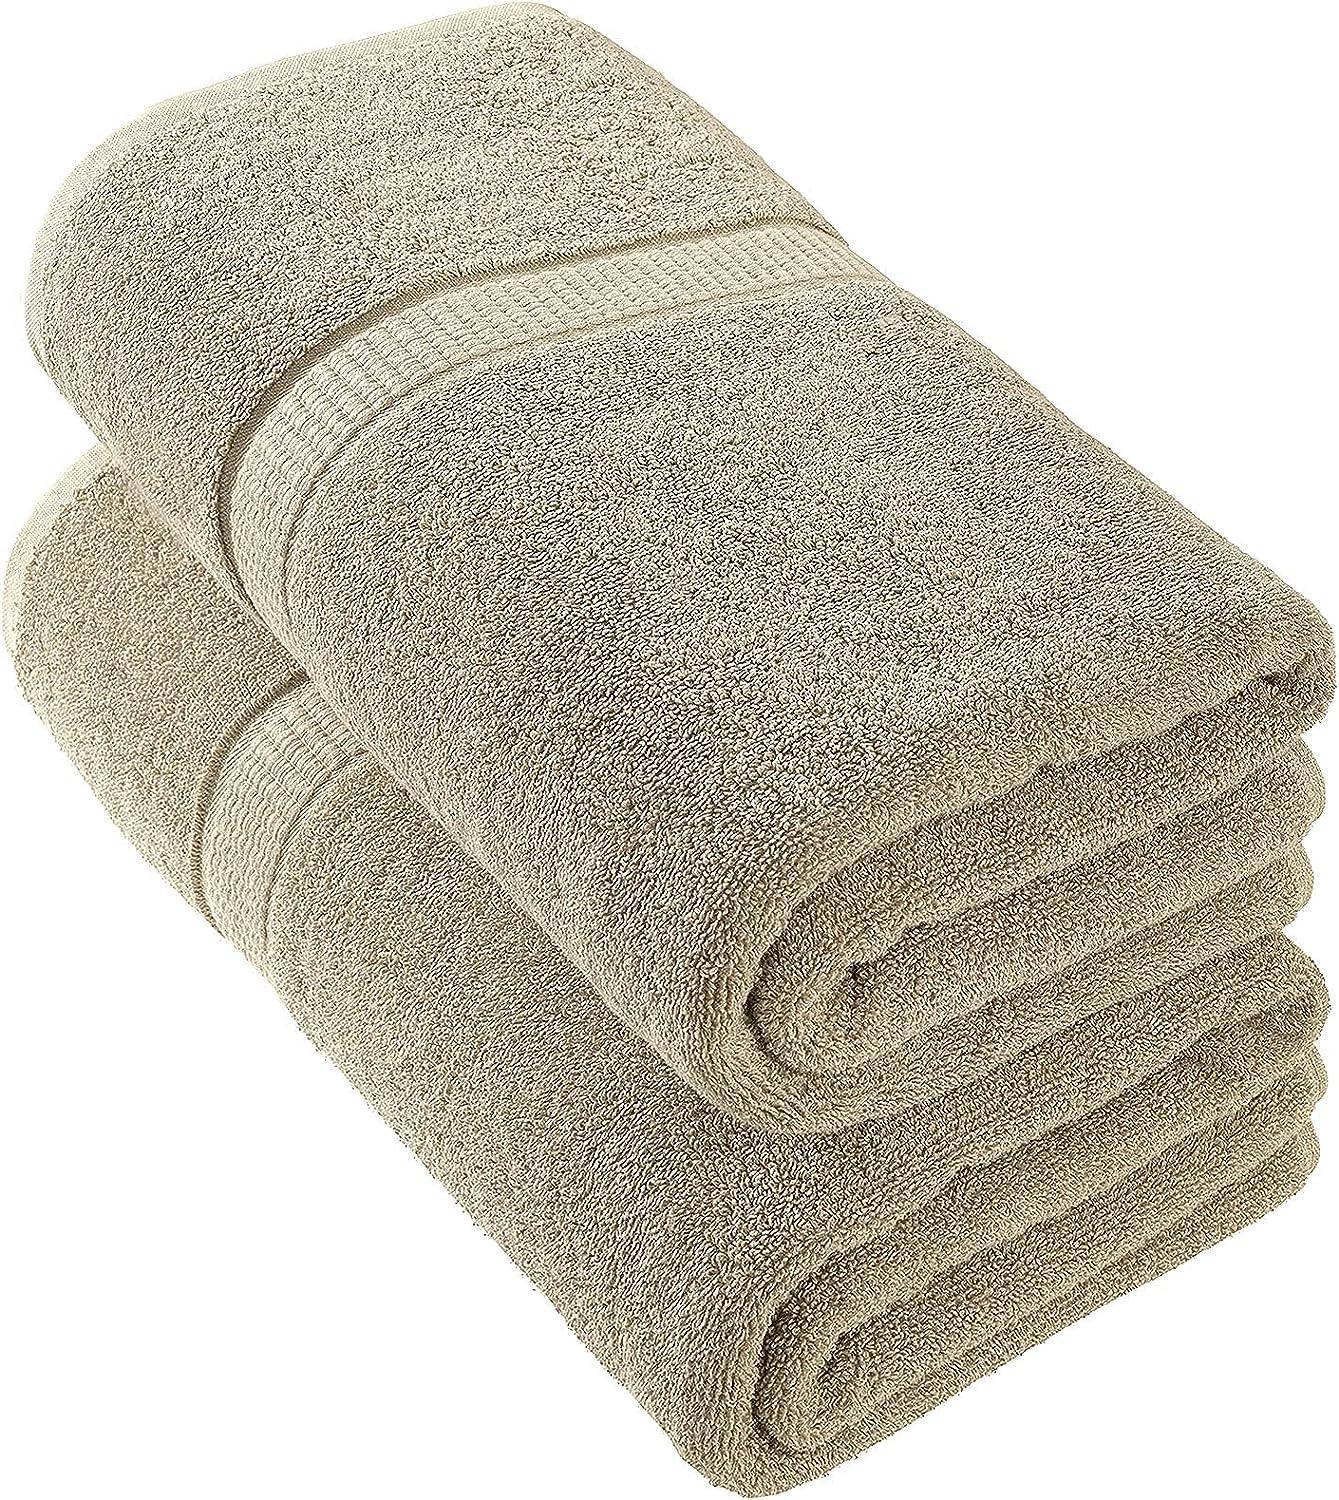 Oakias 2 Pack Luxury Bath Sheets Beige 35 x 70 Inches Highly Absorbent &  Soft 600 GSM Extra Large Bath Towels Beige 2